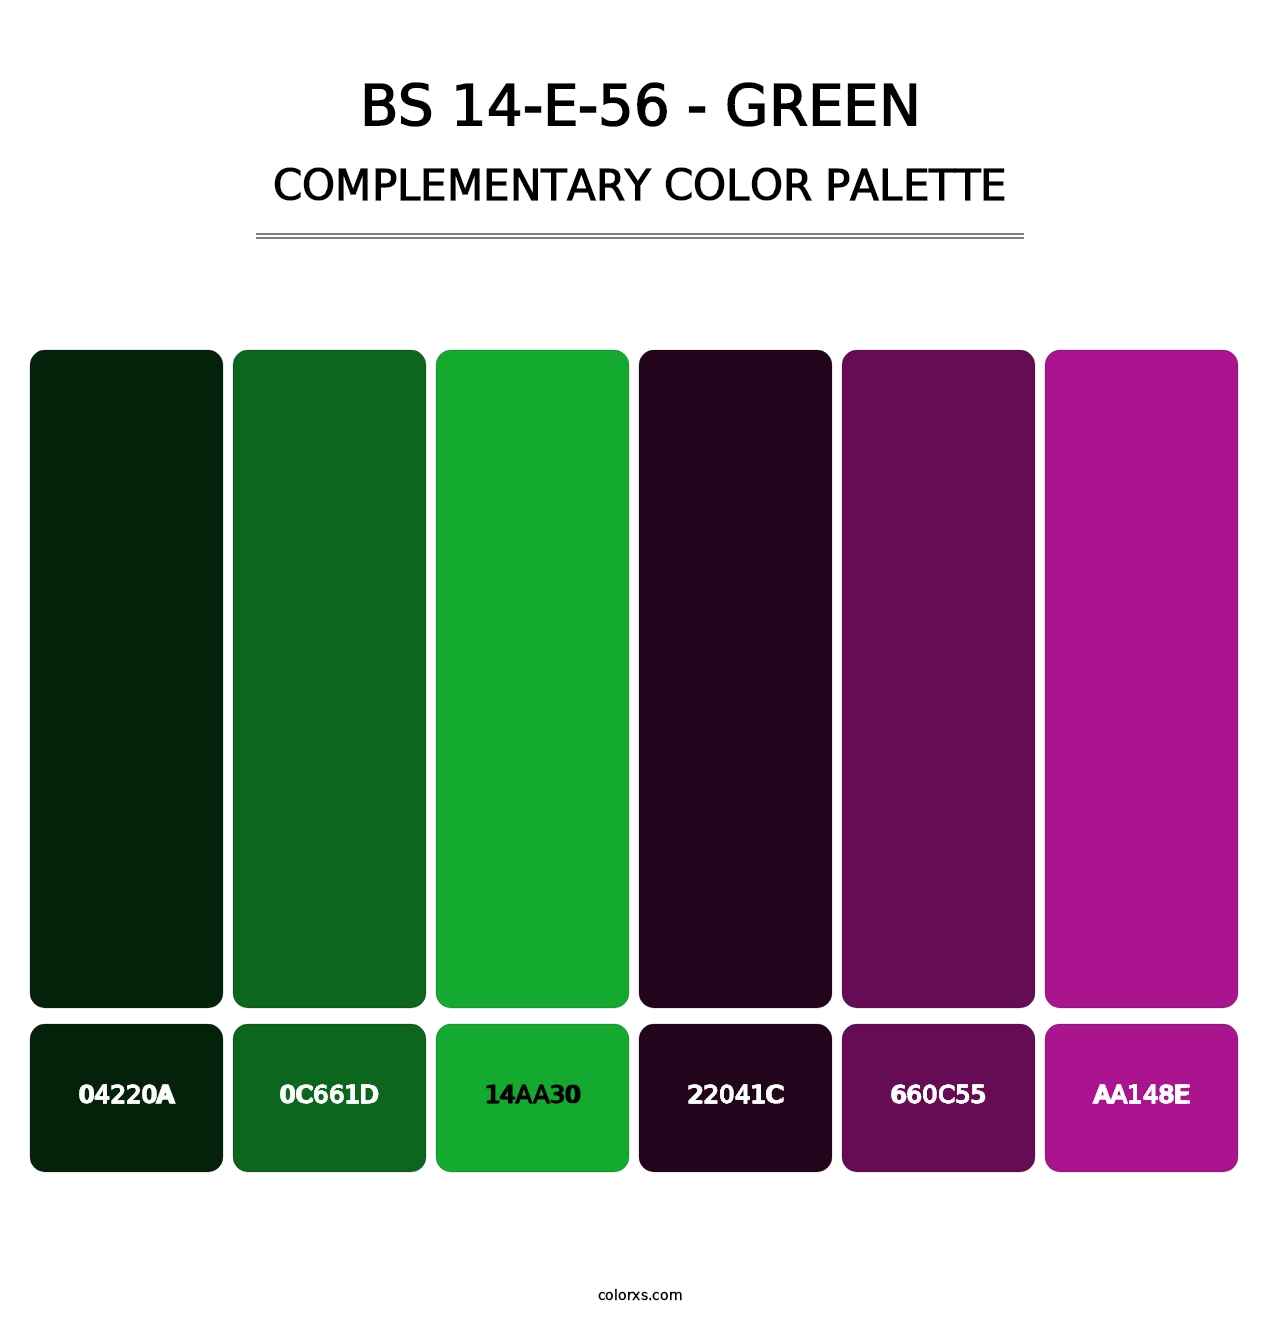 BS 14-E-56 - Green - Complementary Color Palette